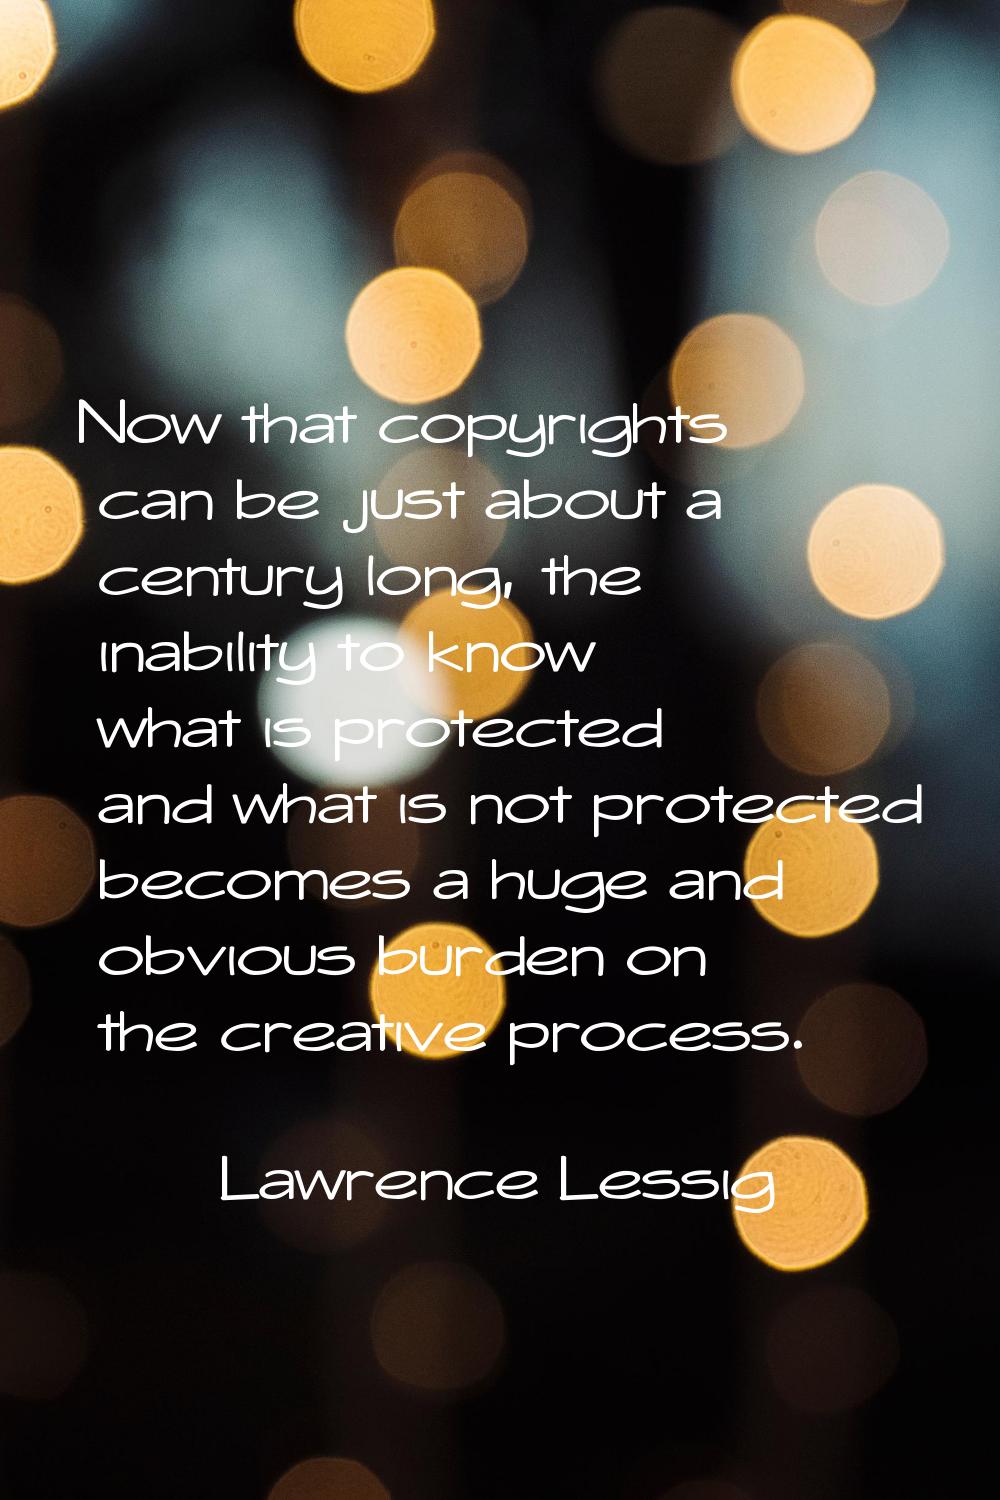 Now that copyrights can be just about a century long, the inability to know what is protected and w